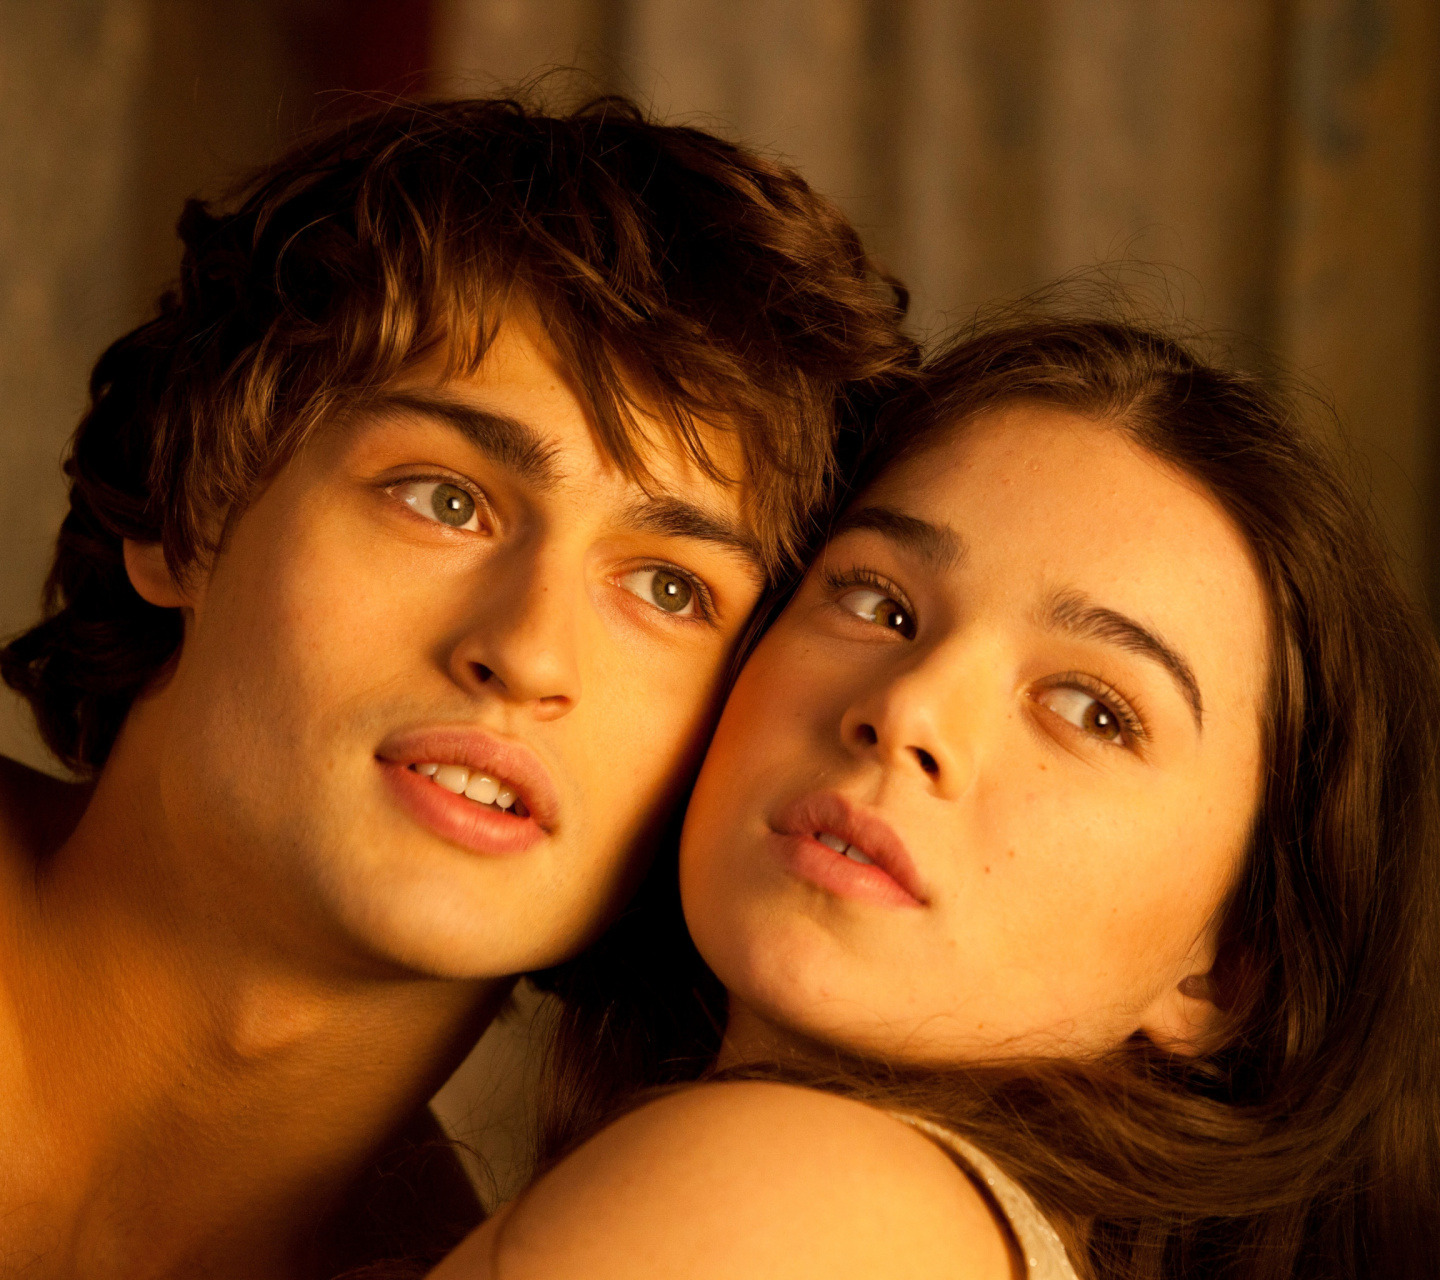 Romeo and Juliet with Hailee Steinfeld and Douglas Booth wallpaper 1440x1280